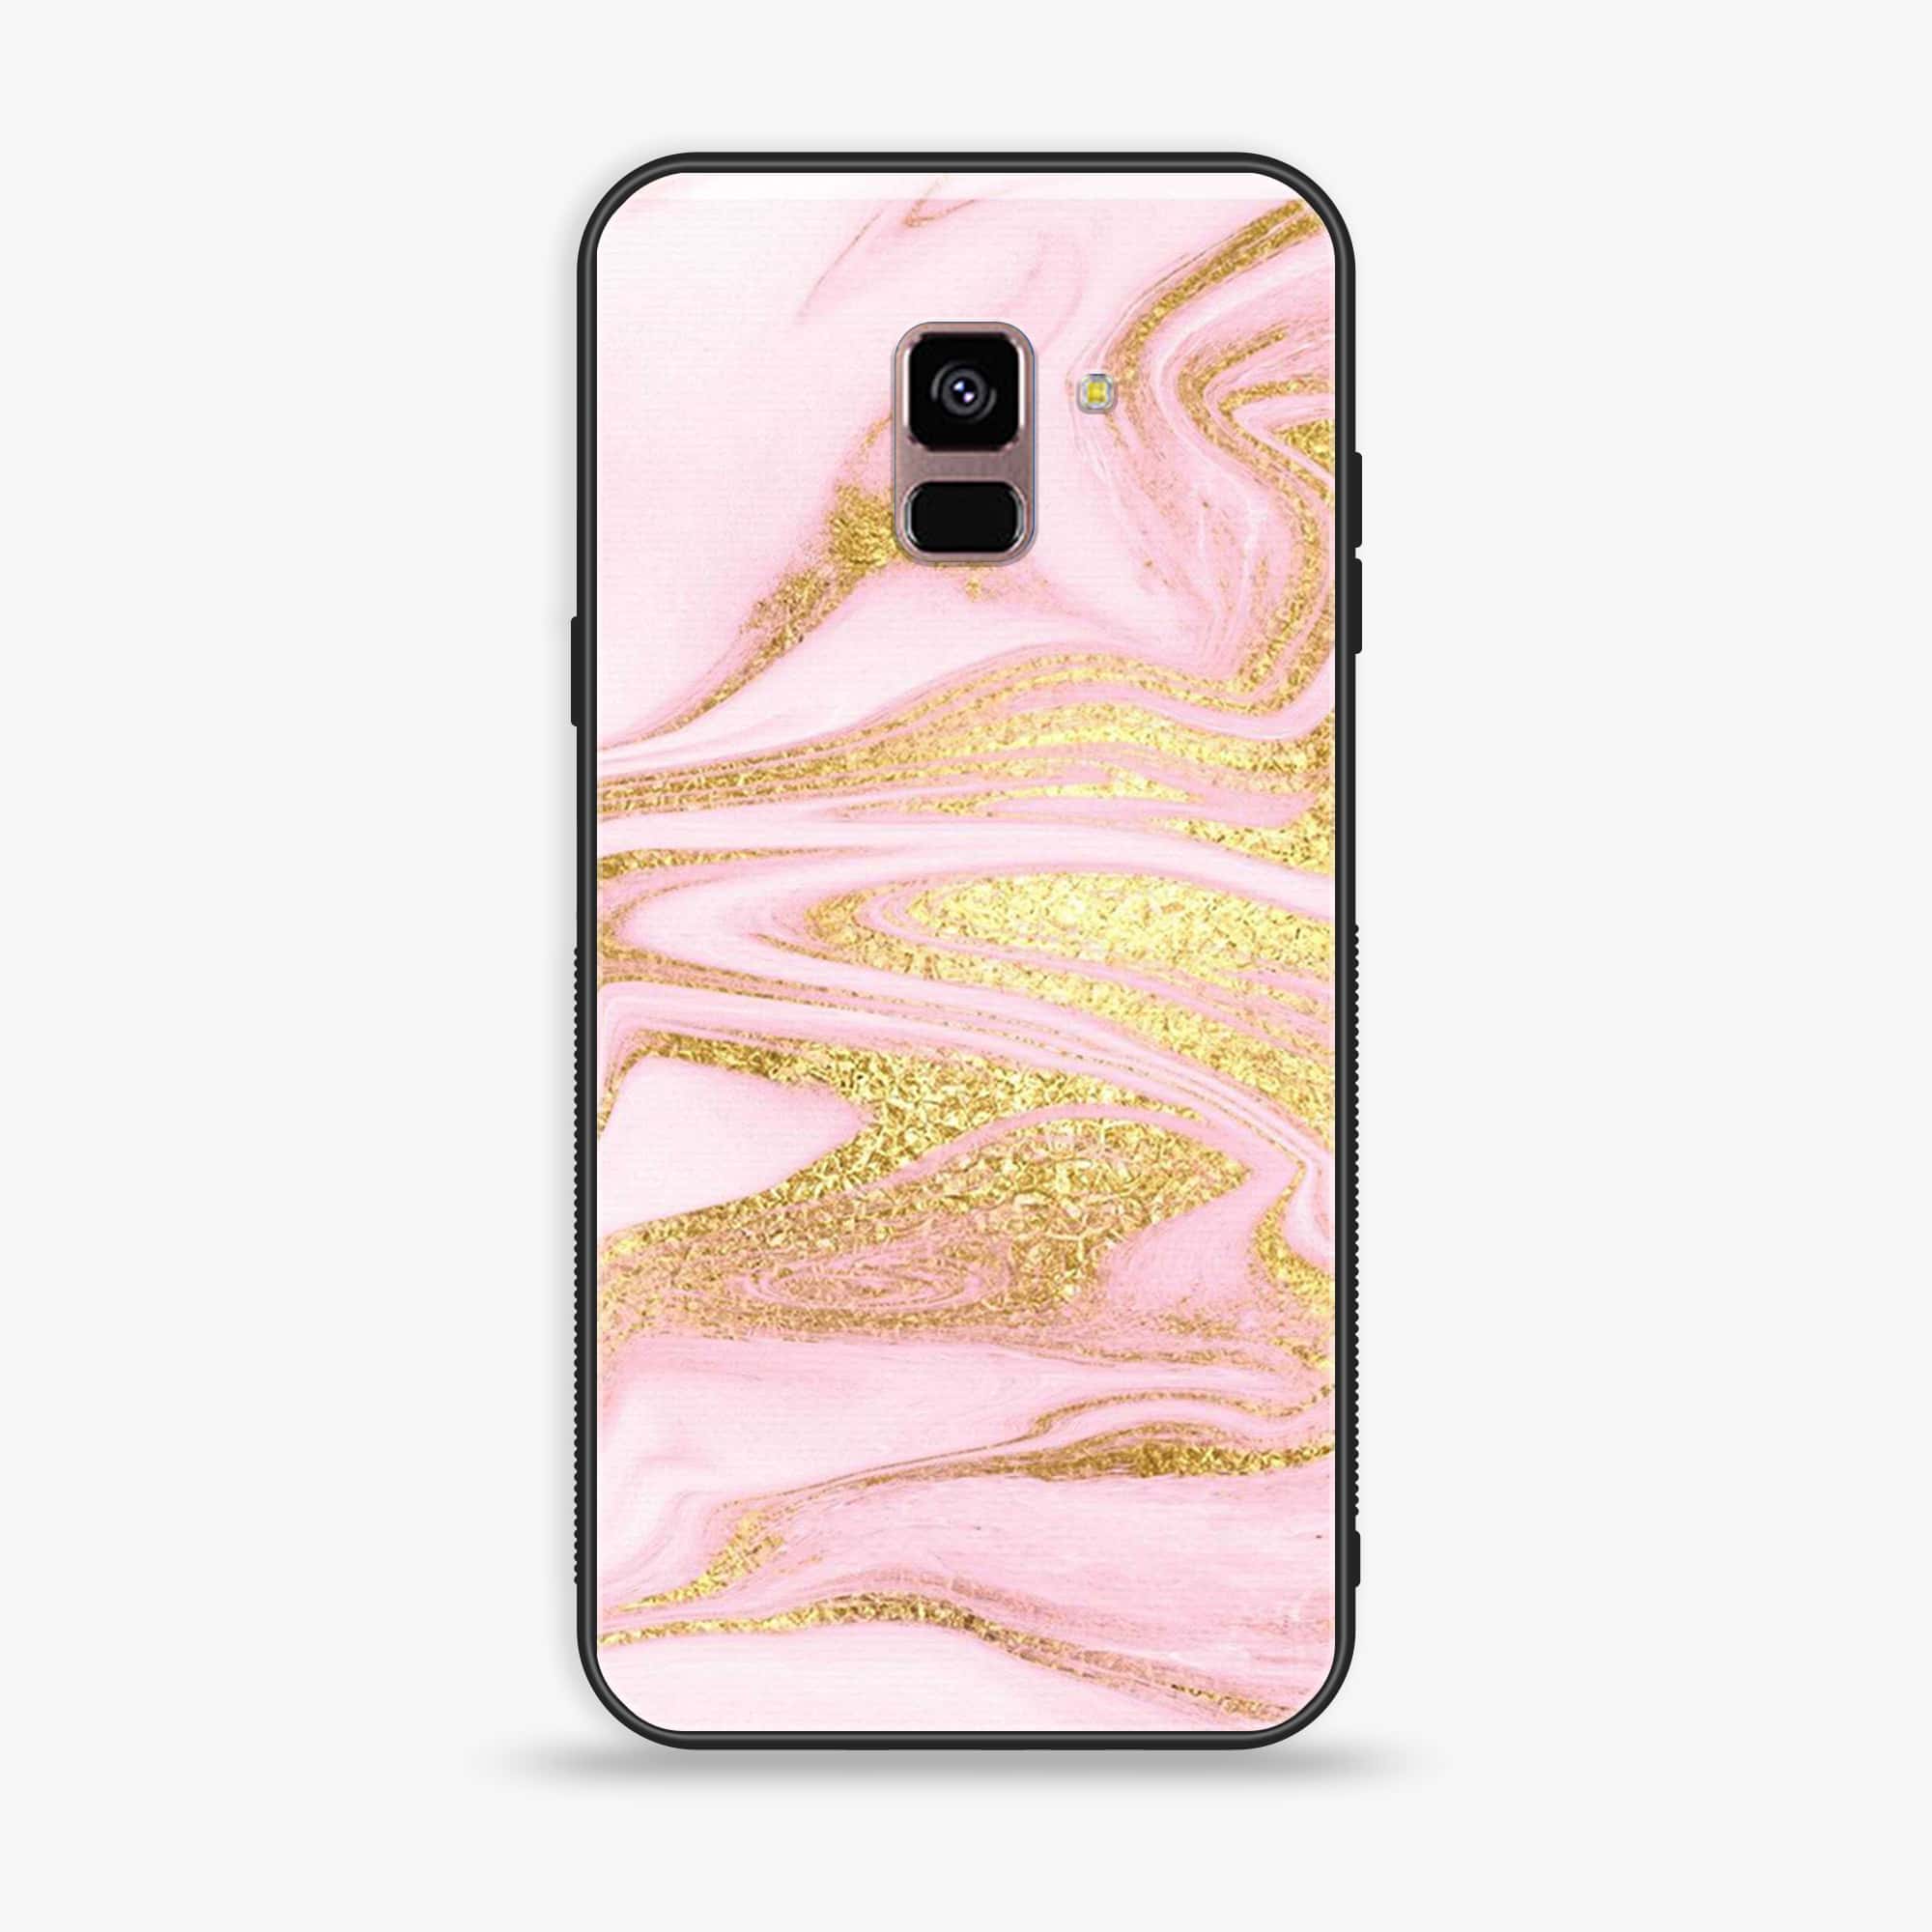 Samsung Galaxy A8+ (2018) - Pink Marble Series - Premium Printed Glass soft Bumper shock Proof Case